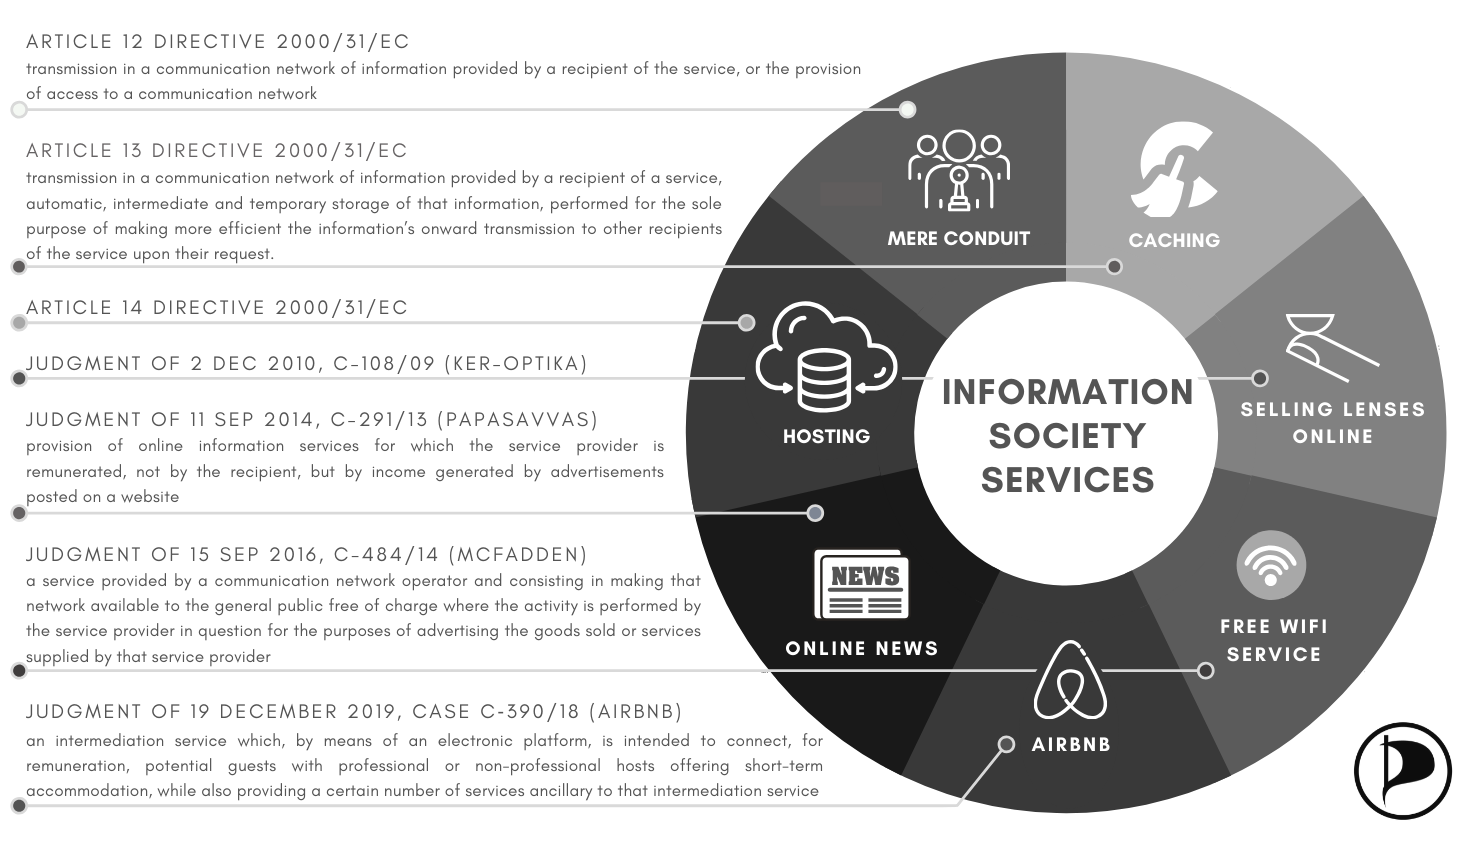 Information Society Services